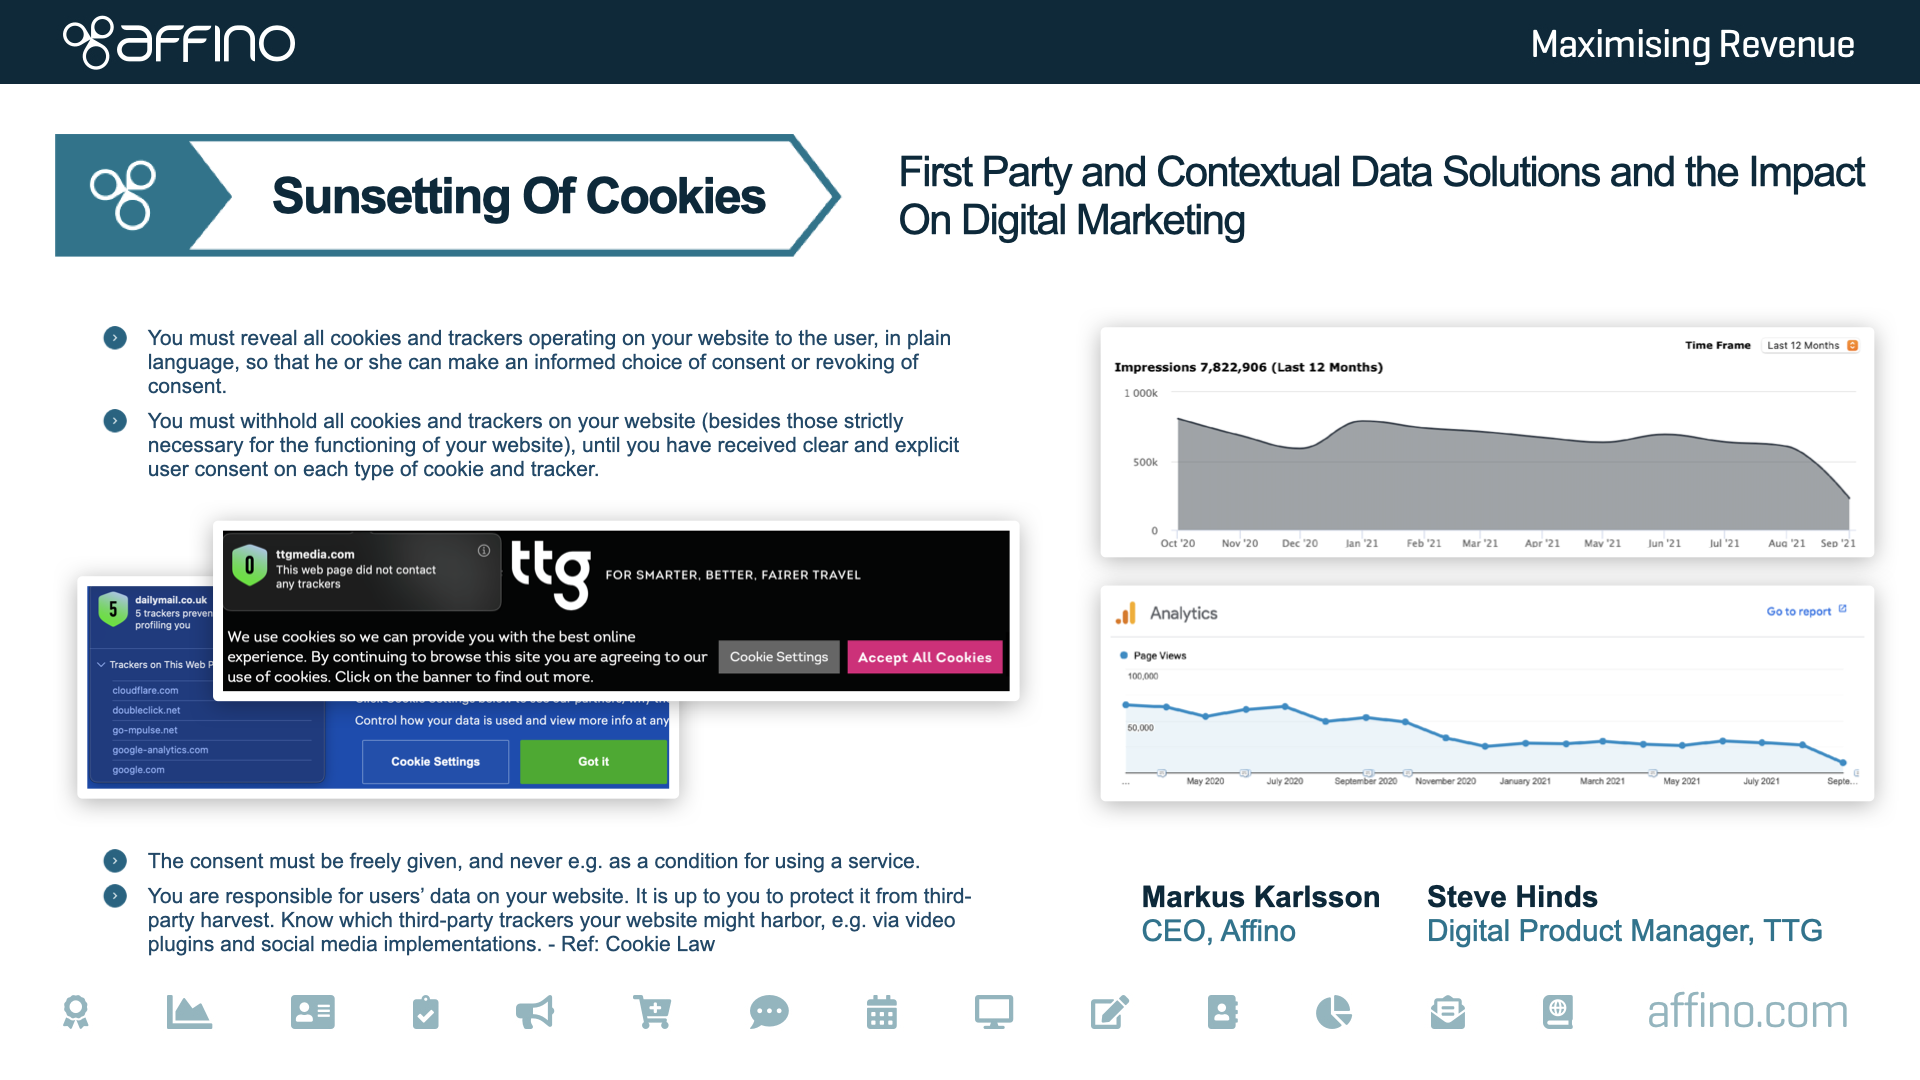 Affino Data, Cookies and GDPR